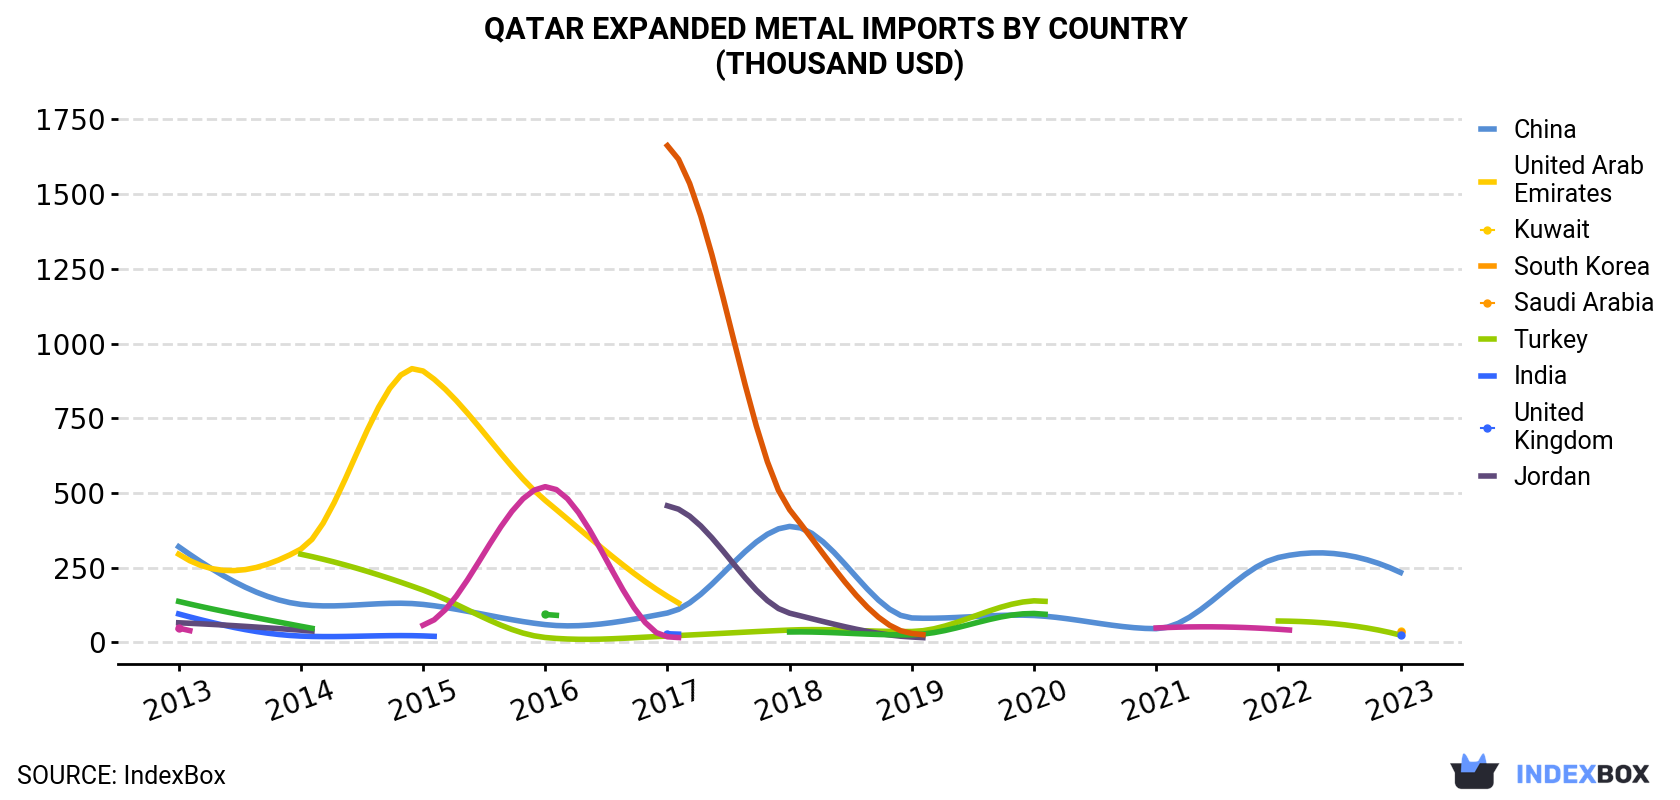 Qatar Expanded Metal Imports By Country (Thousand USD)